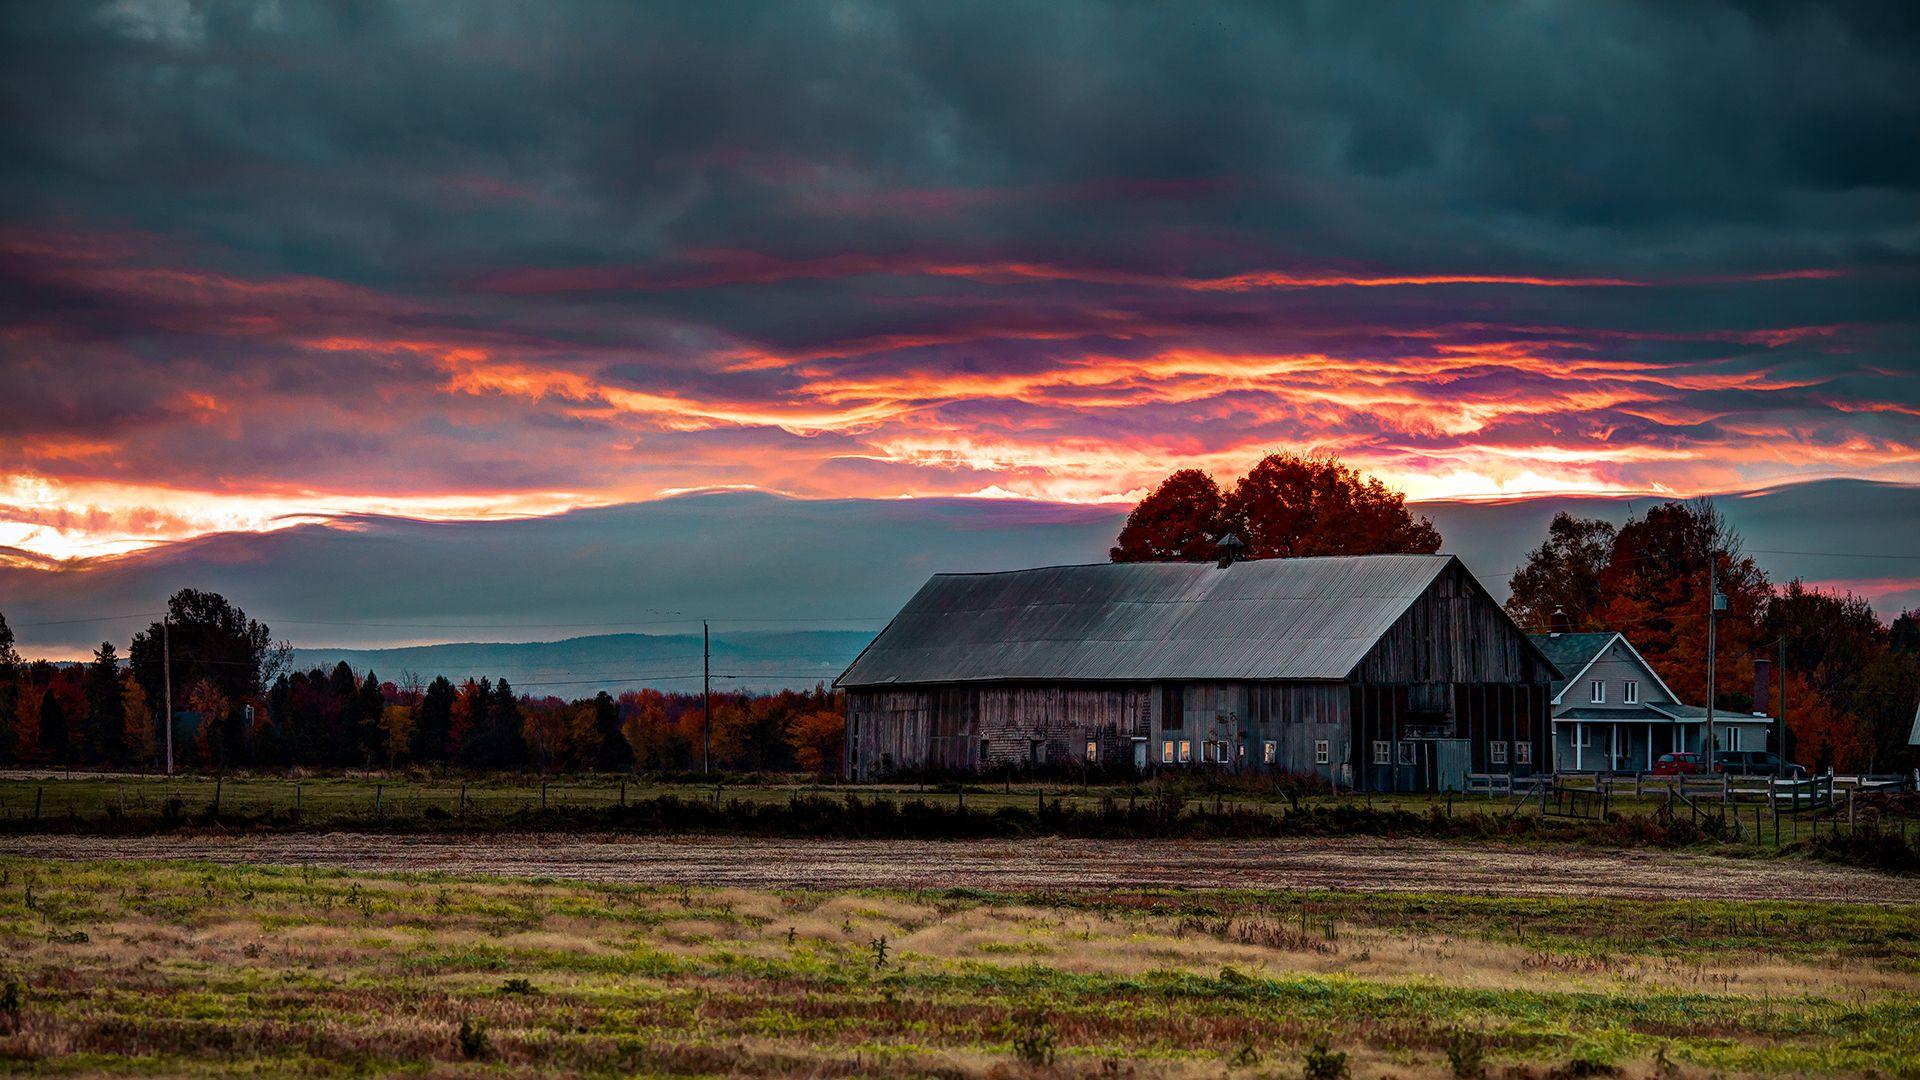 nature landscapes houses barn farm rustic fields trees autumn fall sunset sunrise sky clouds wallpaper. Sunrise wallpaper, Farmhouse wallpaper, Scenery wallpaper